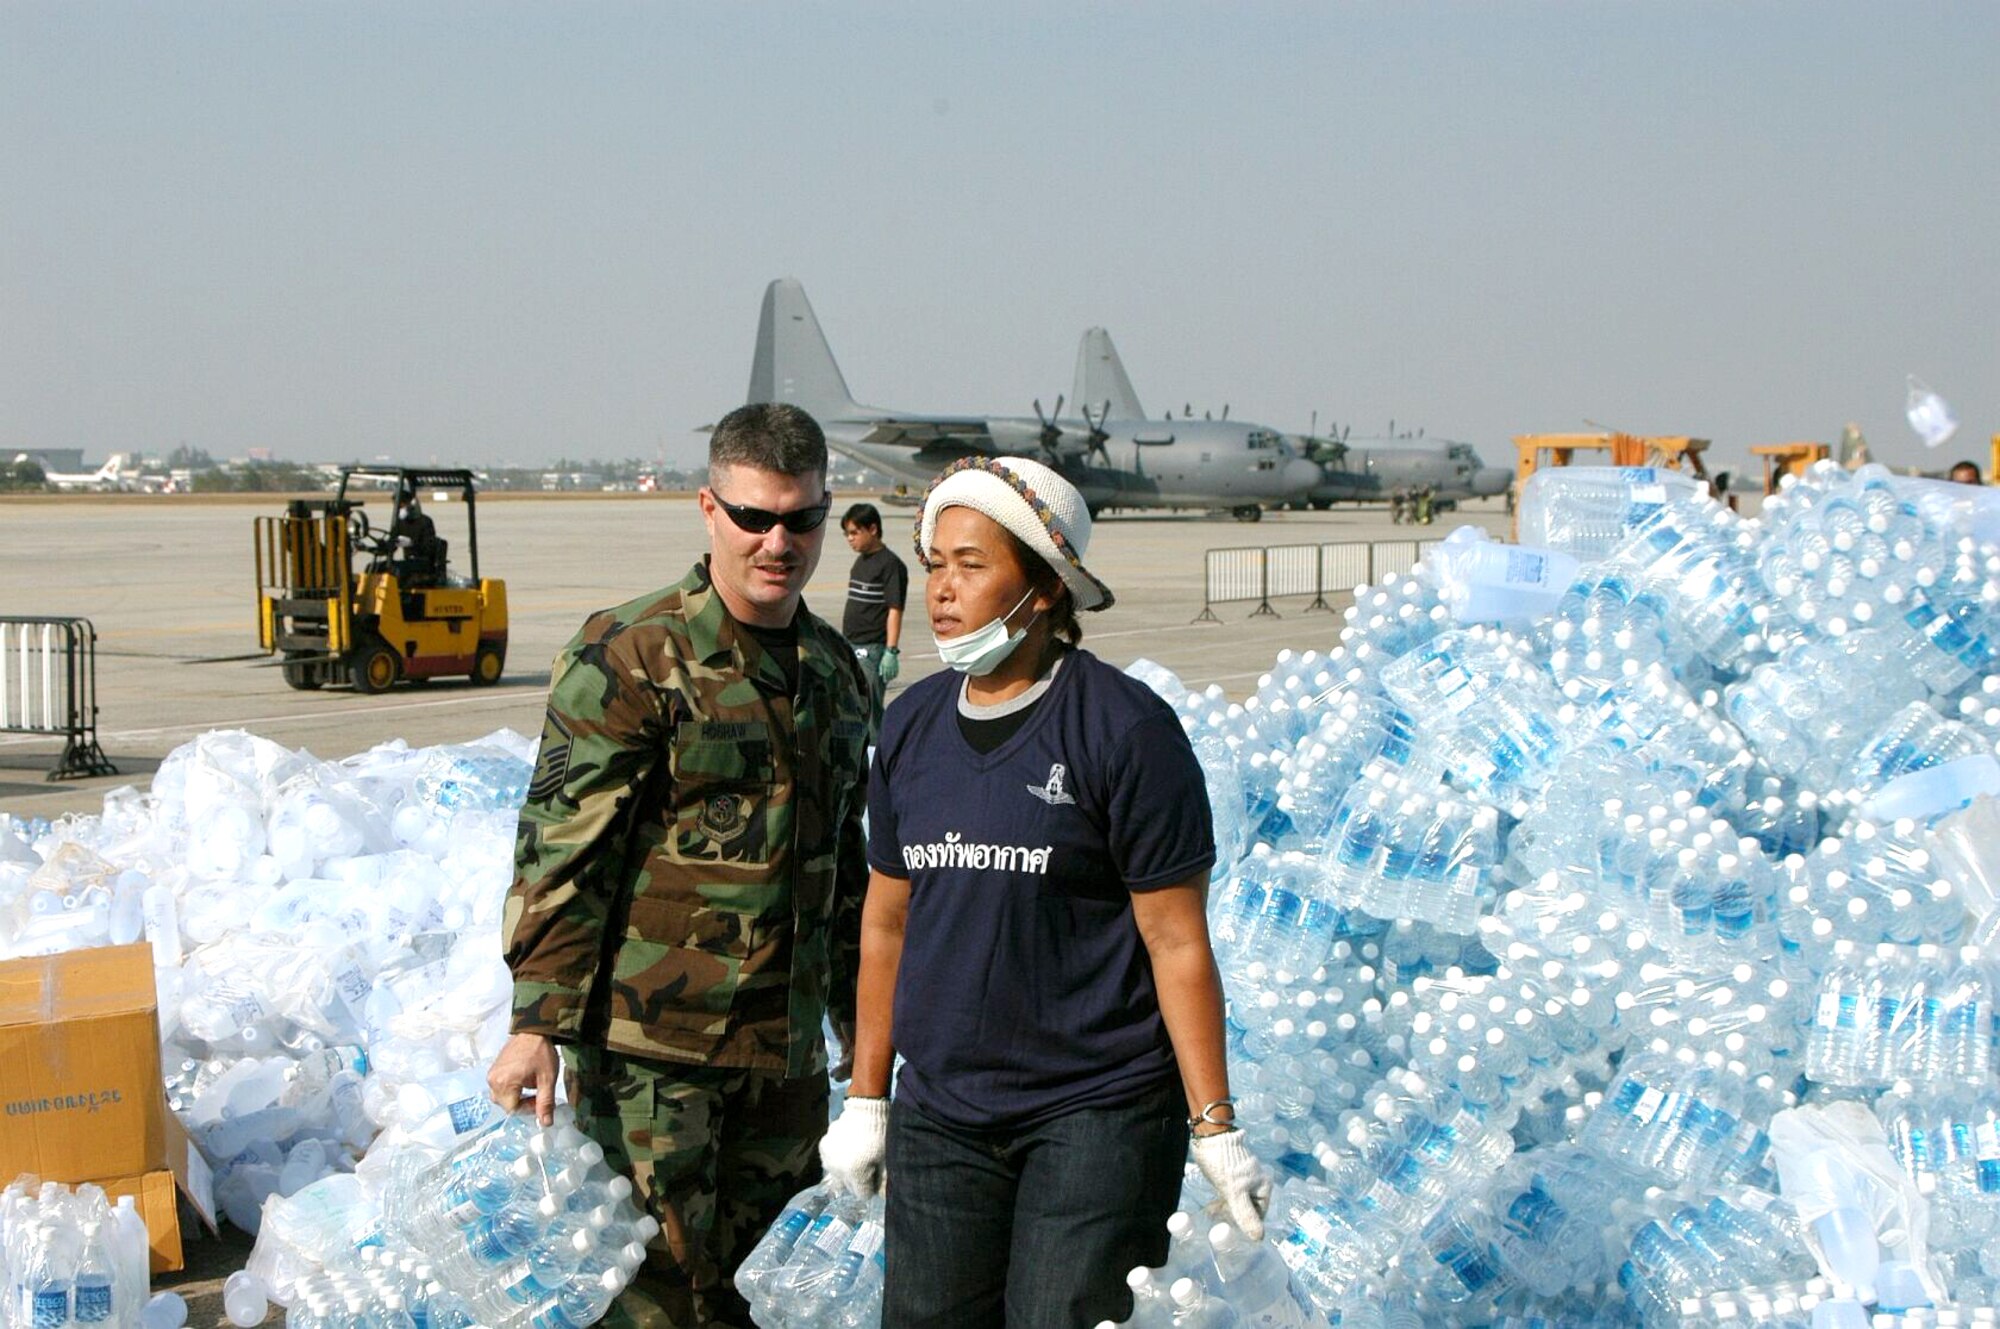 BANGKOK, Thailand -- An Airman here teams up with a Thai volunteer Jan. 1 to organize bottles of drinking water at the international airport.  He and 100 others from the 353rd Special Operations Group are flying supplies to the tsunami-hit areas of southern Thailand.  The 353rd SOG is assigned to Kadena Air Base, Japan.  (U.S. Air Force photo by Master Sgt. Michael Farris)